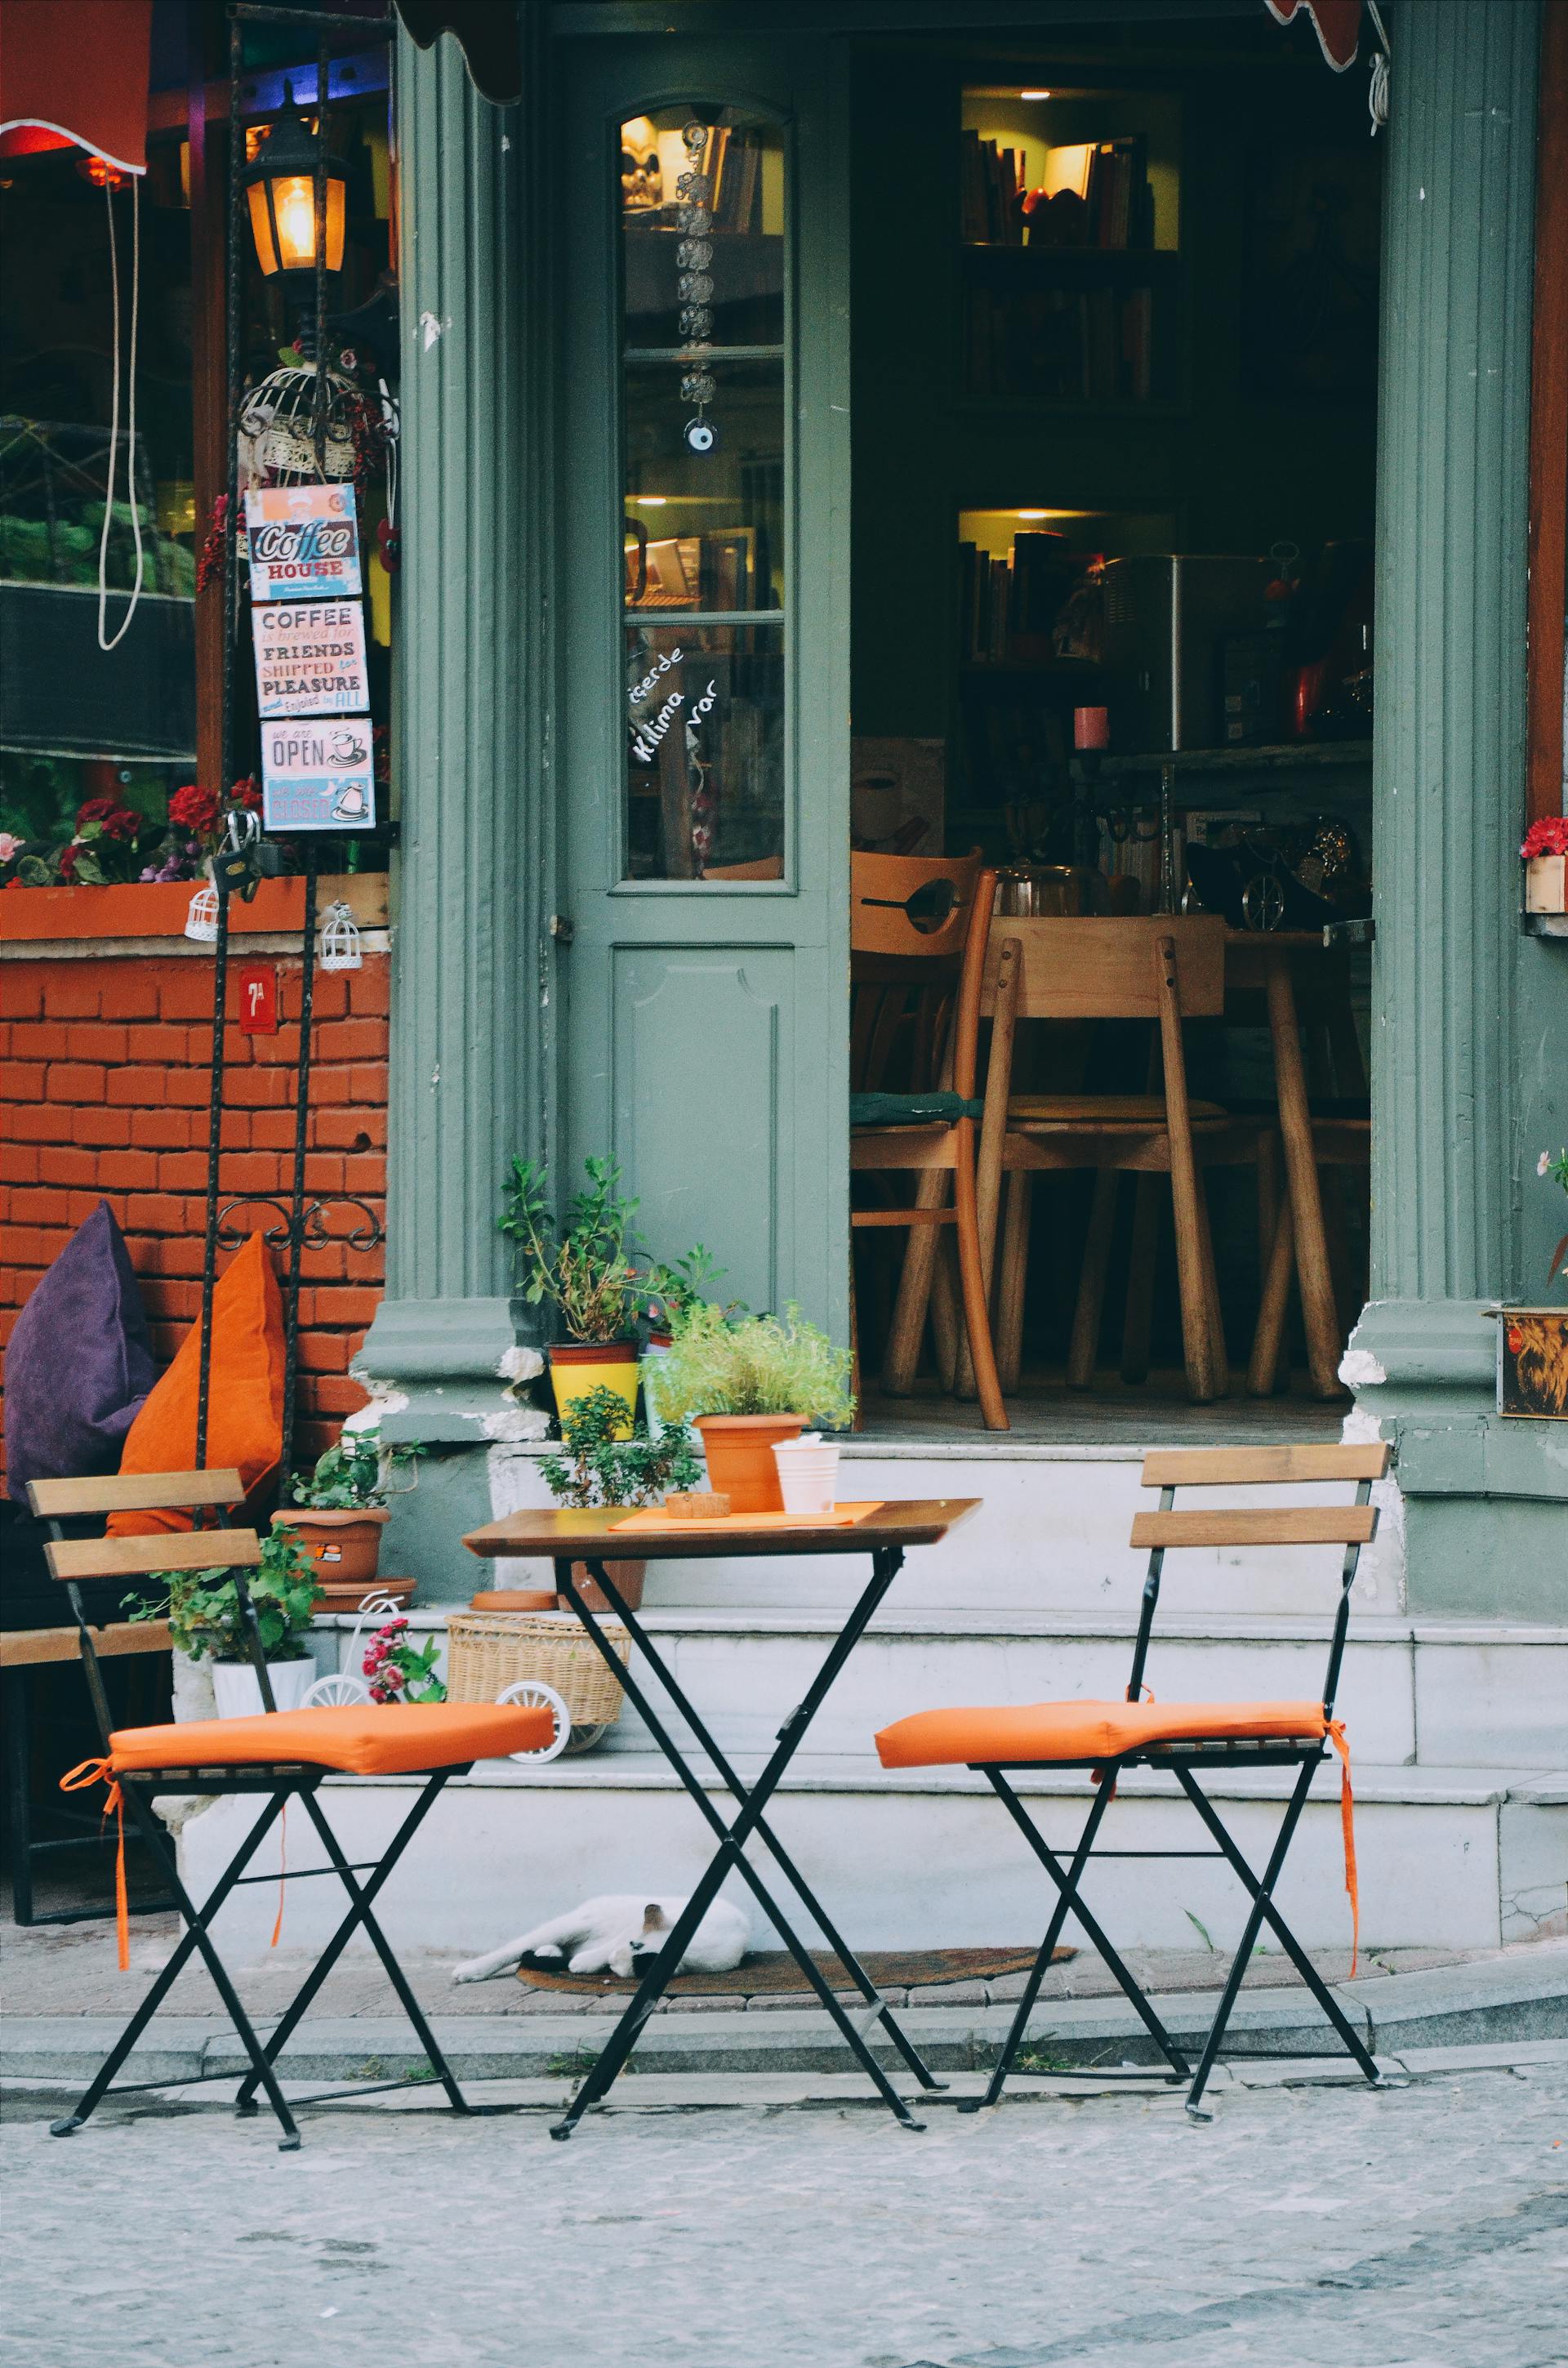 A brown and orange three-piece patio set outside a coffee shop | Source: Pexels